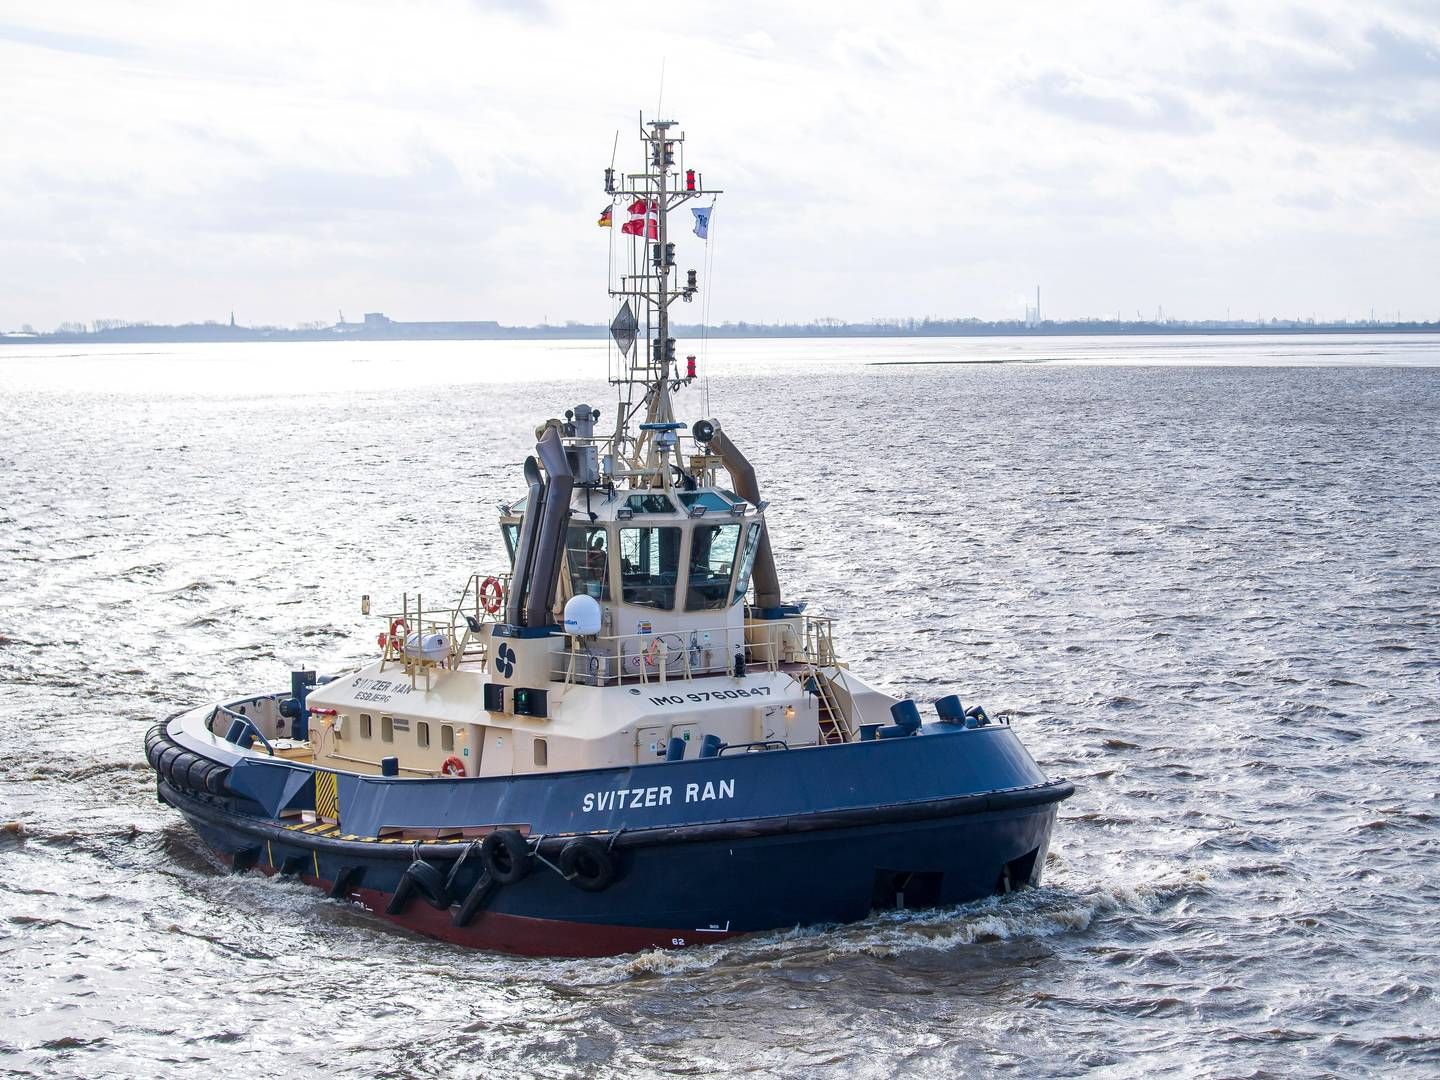 Svitzer has a fleet of 456 tugs, operates in 37 countries, has agreements in 140 ports and with 40 port terminals worldwide. The company employs around 4,000 people. | Foto: Sina Schuldt/AP/Ritzau Scanpix